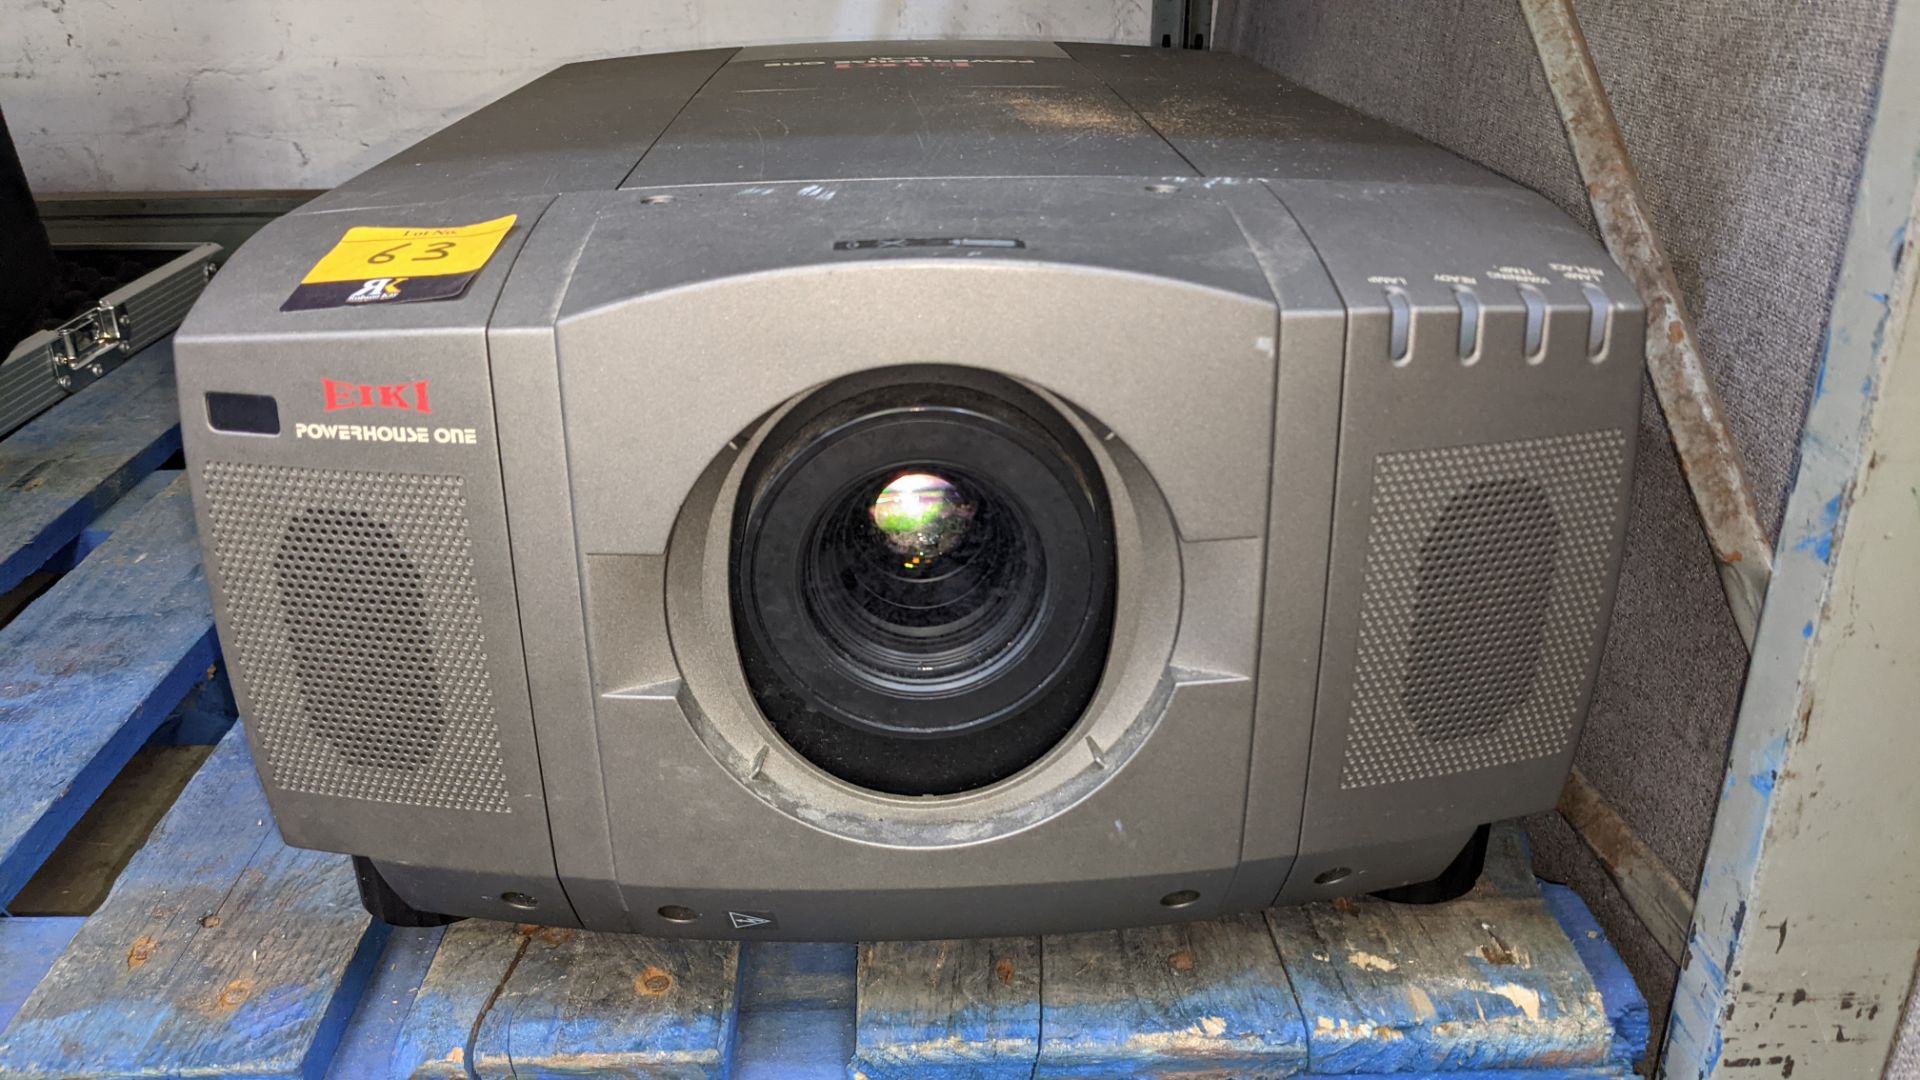 Eiki Powerhouse One model LC-X1 projector - Image 5 of 12